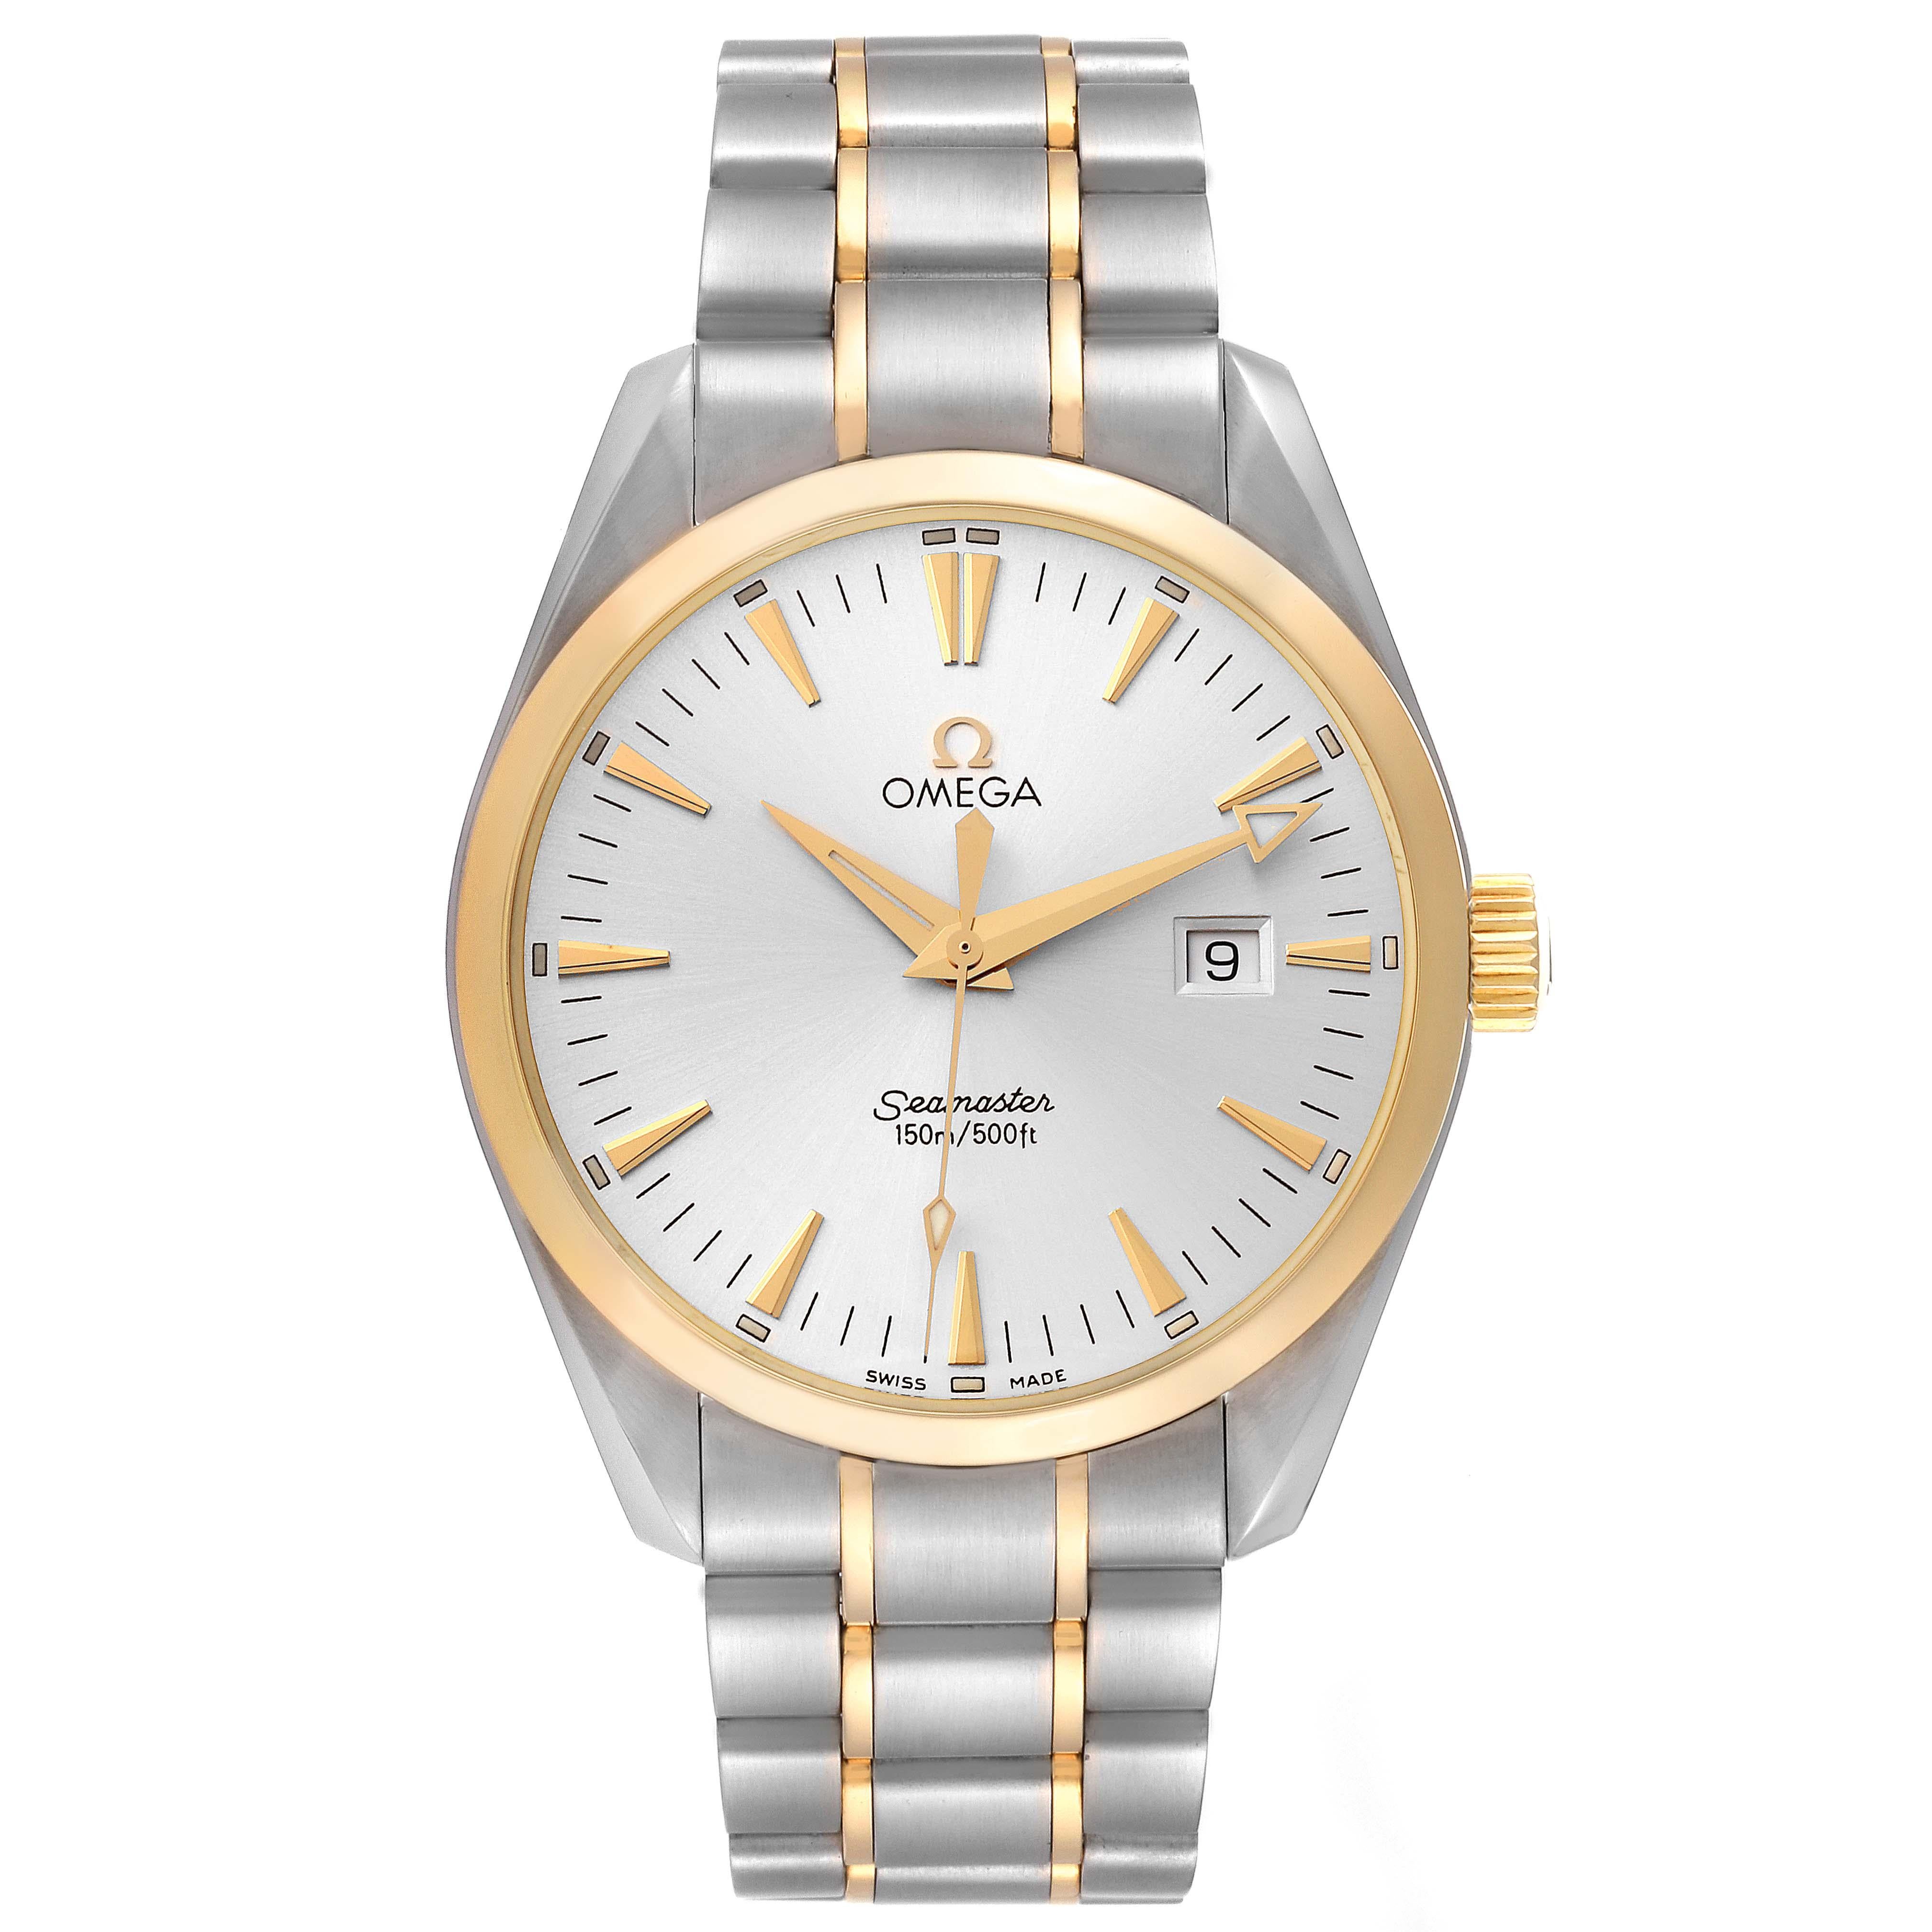 Omega Seamaster Aqua Terra 150M Steel Yellow Gold Mens Watch 2317.30.00. Quartz precision movement with rhodium-plated finish. Caliber 1538. Stainless steel and yellow gold round case 39.2 mm in diameter. 18k yellow gold smooth bezel. Scratch